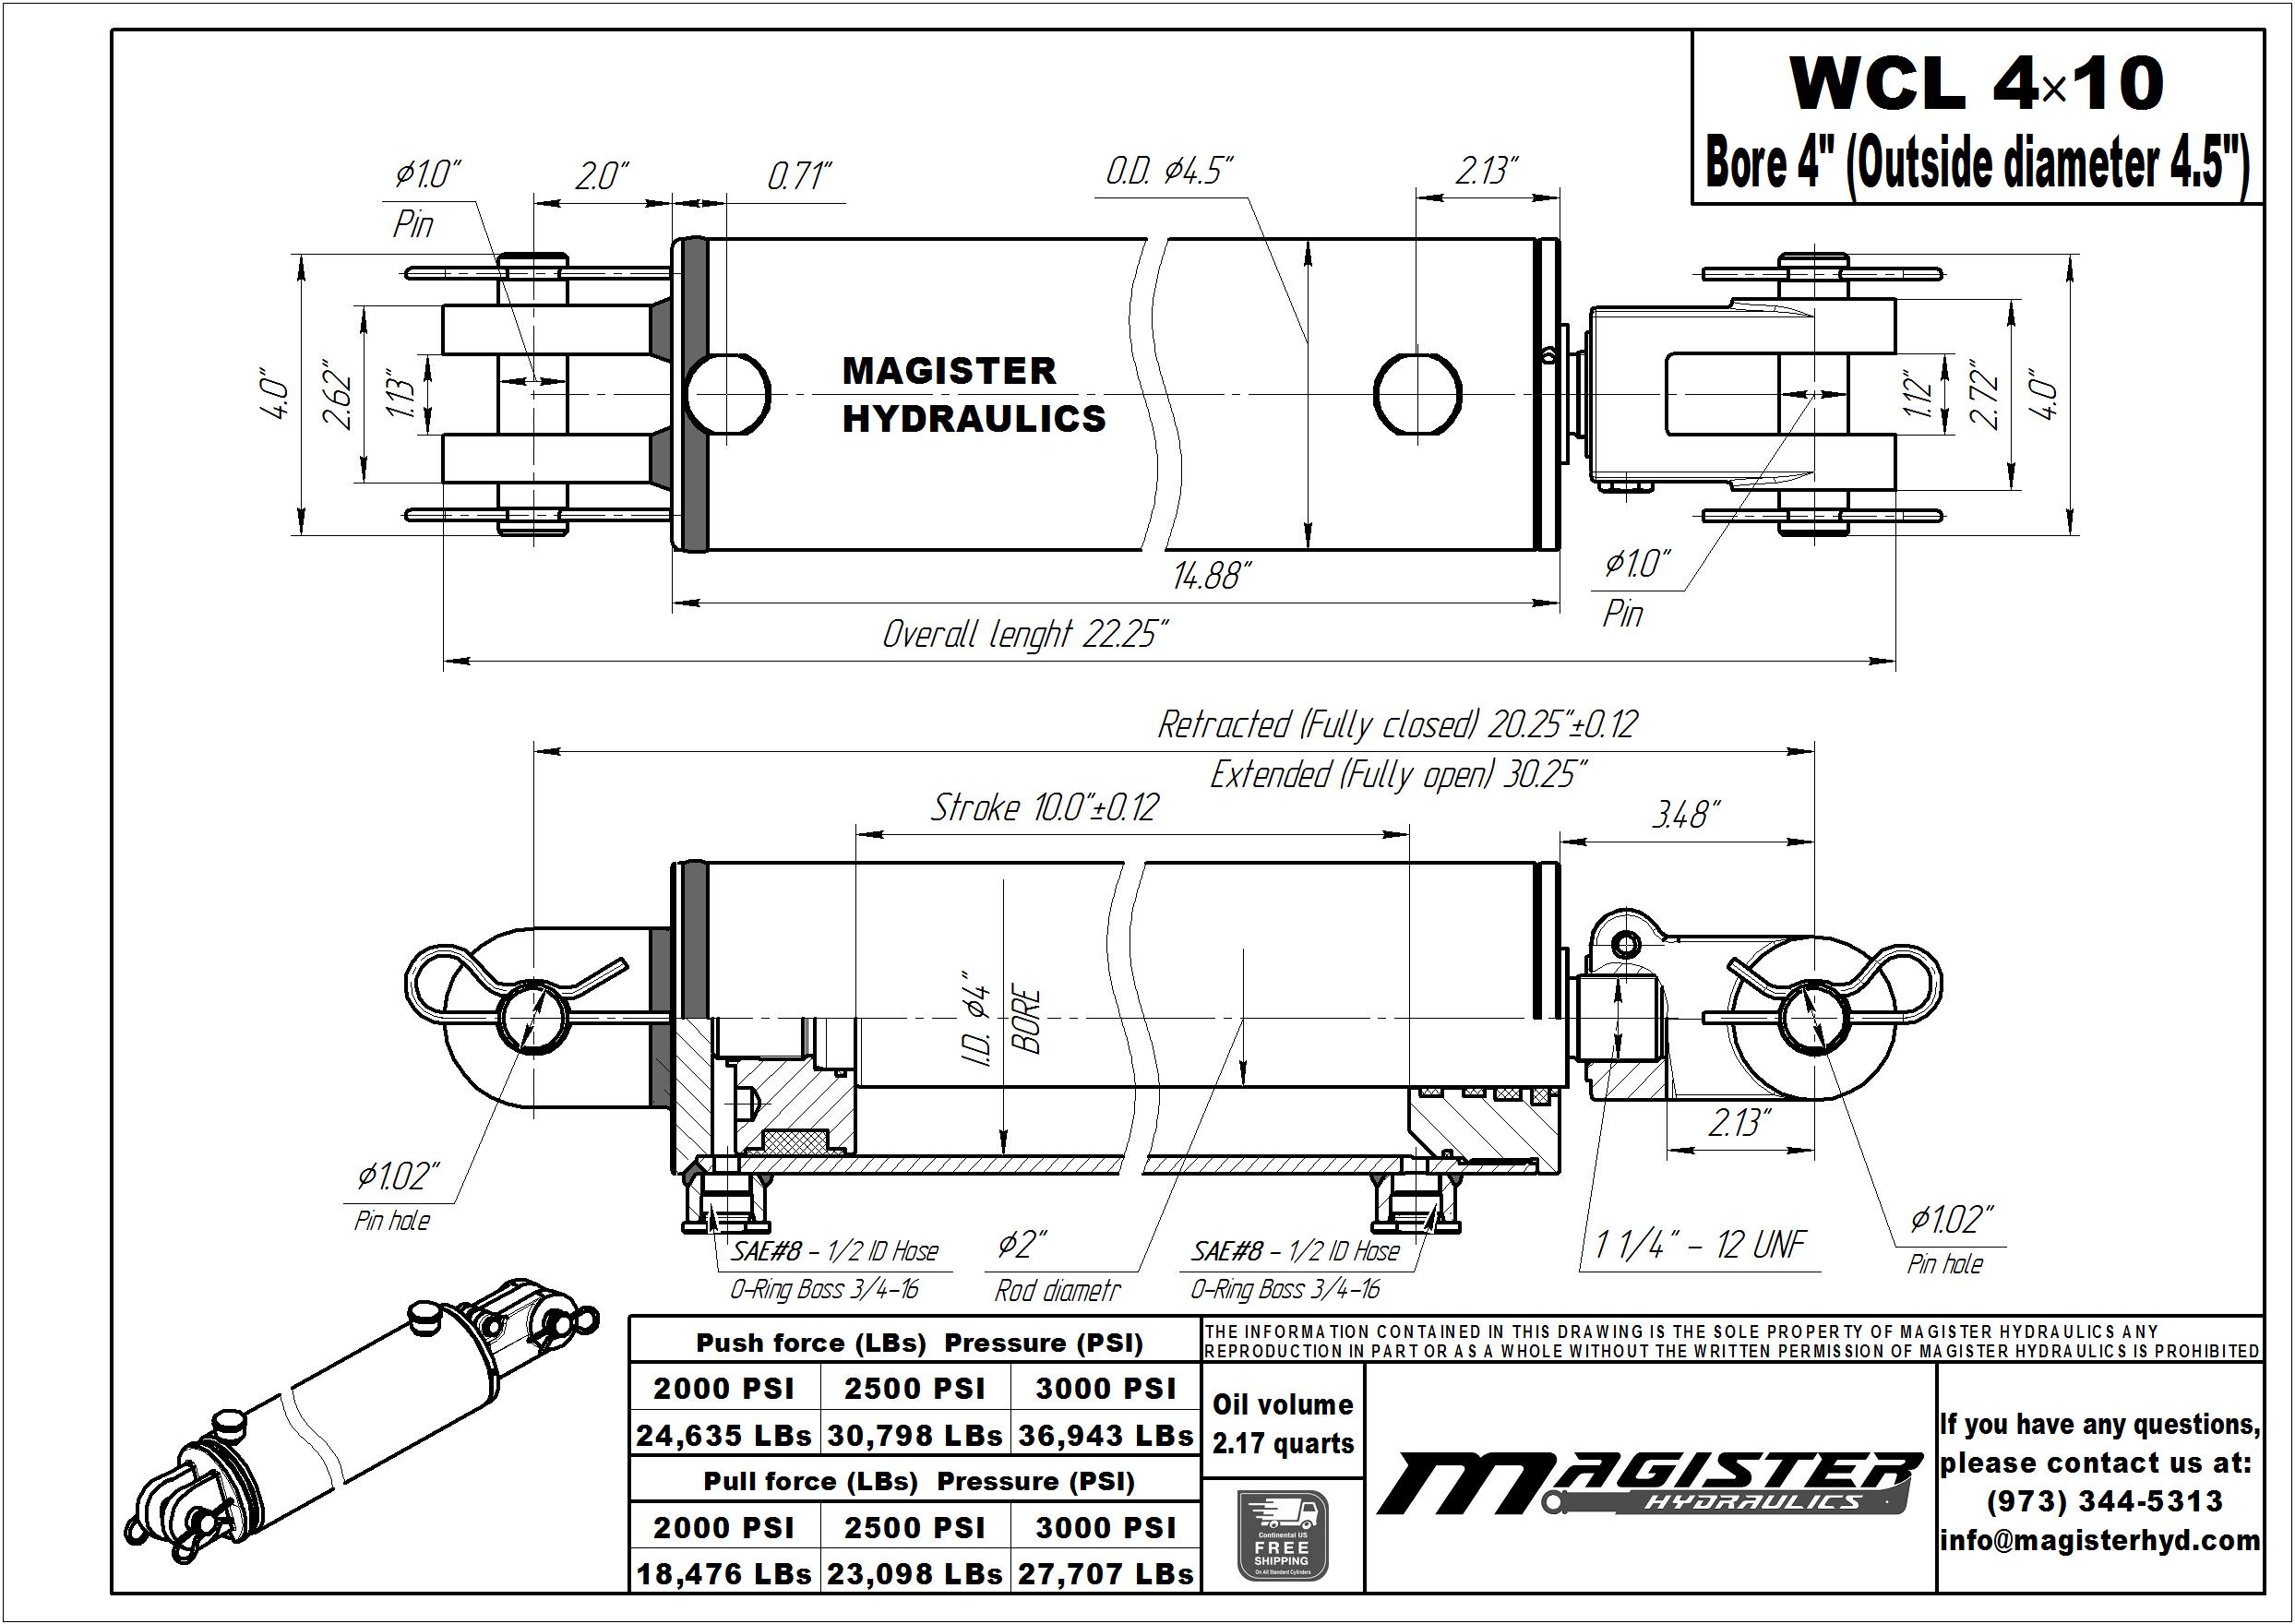 4 bore x 10 stroke hydraulic cylinder, welded clevis double acting cylinder | Magister Hydraulics